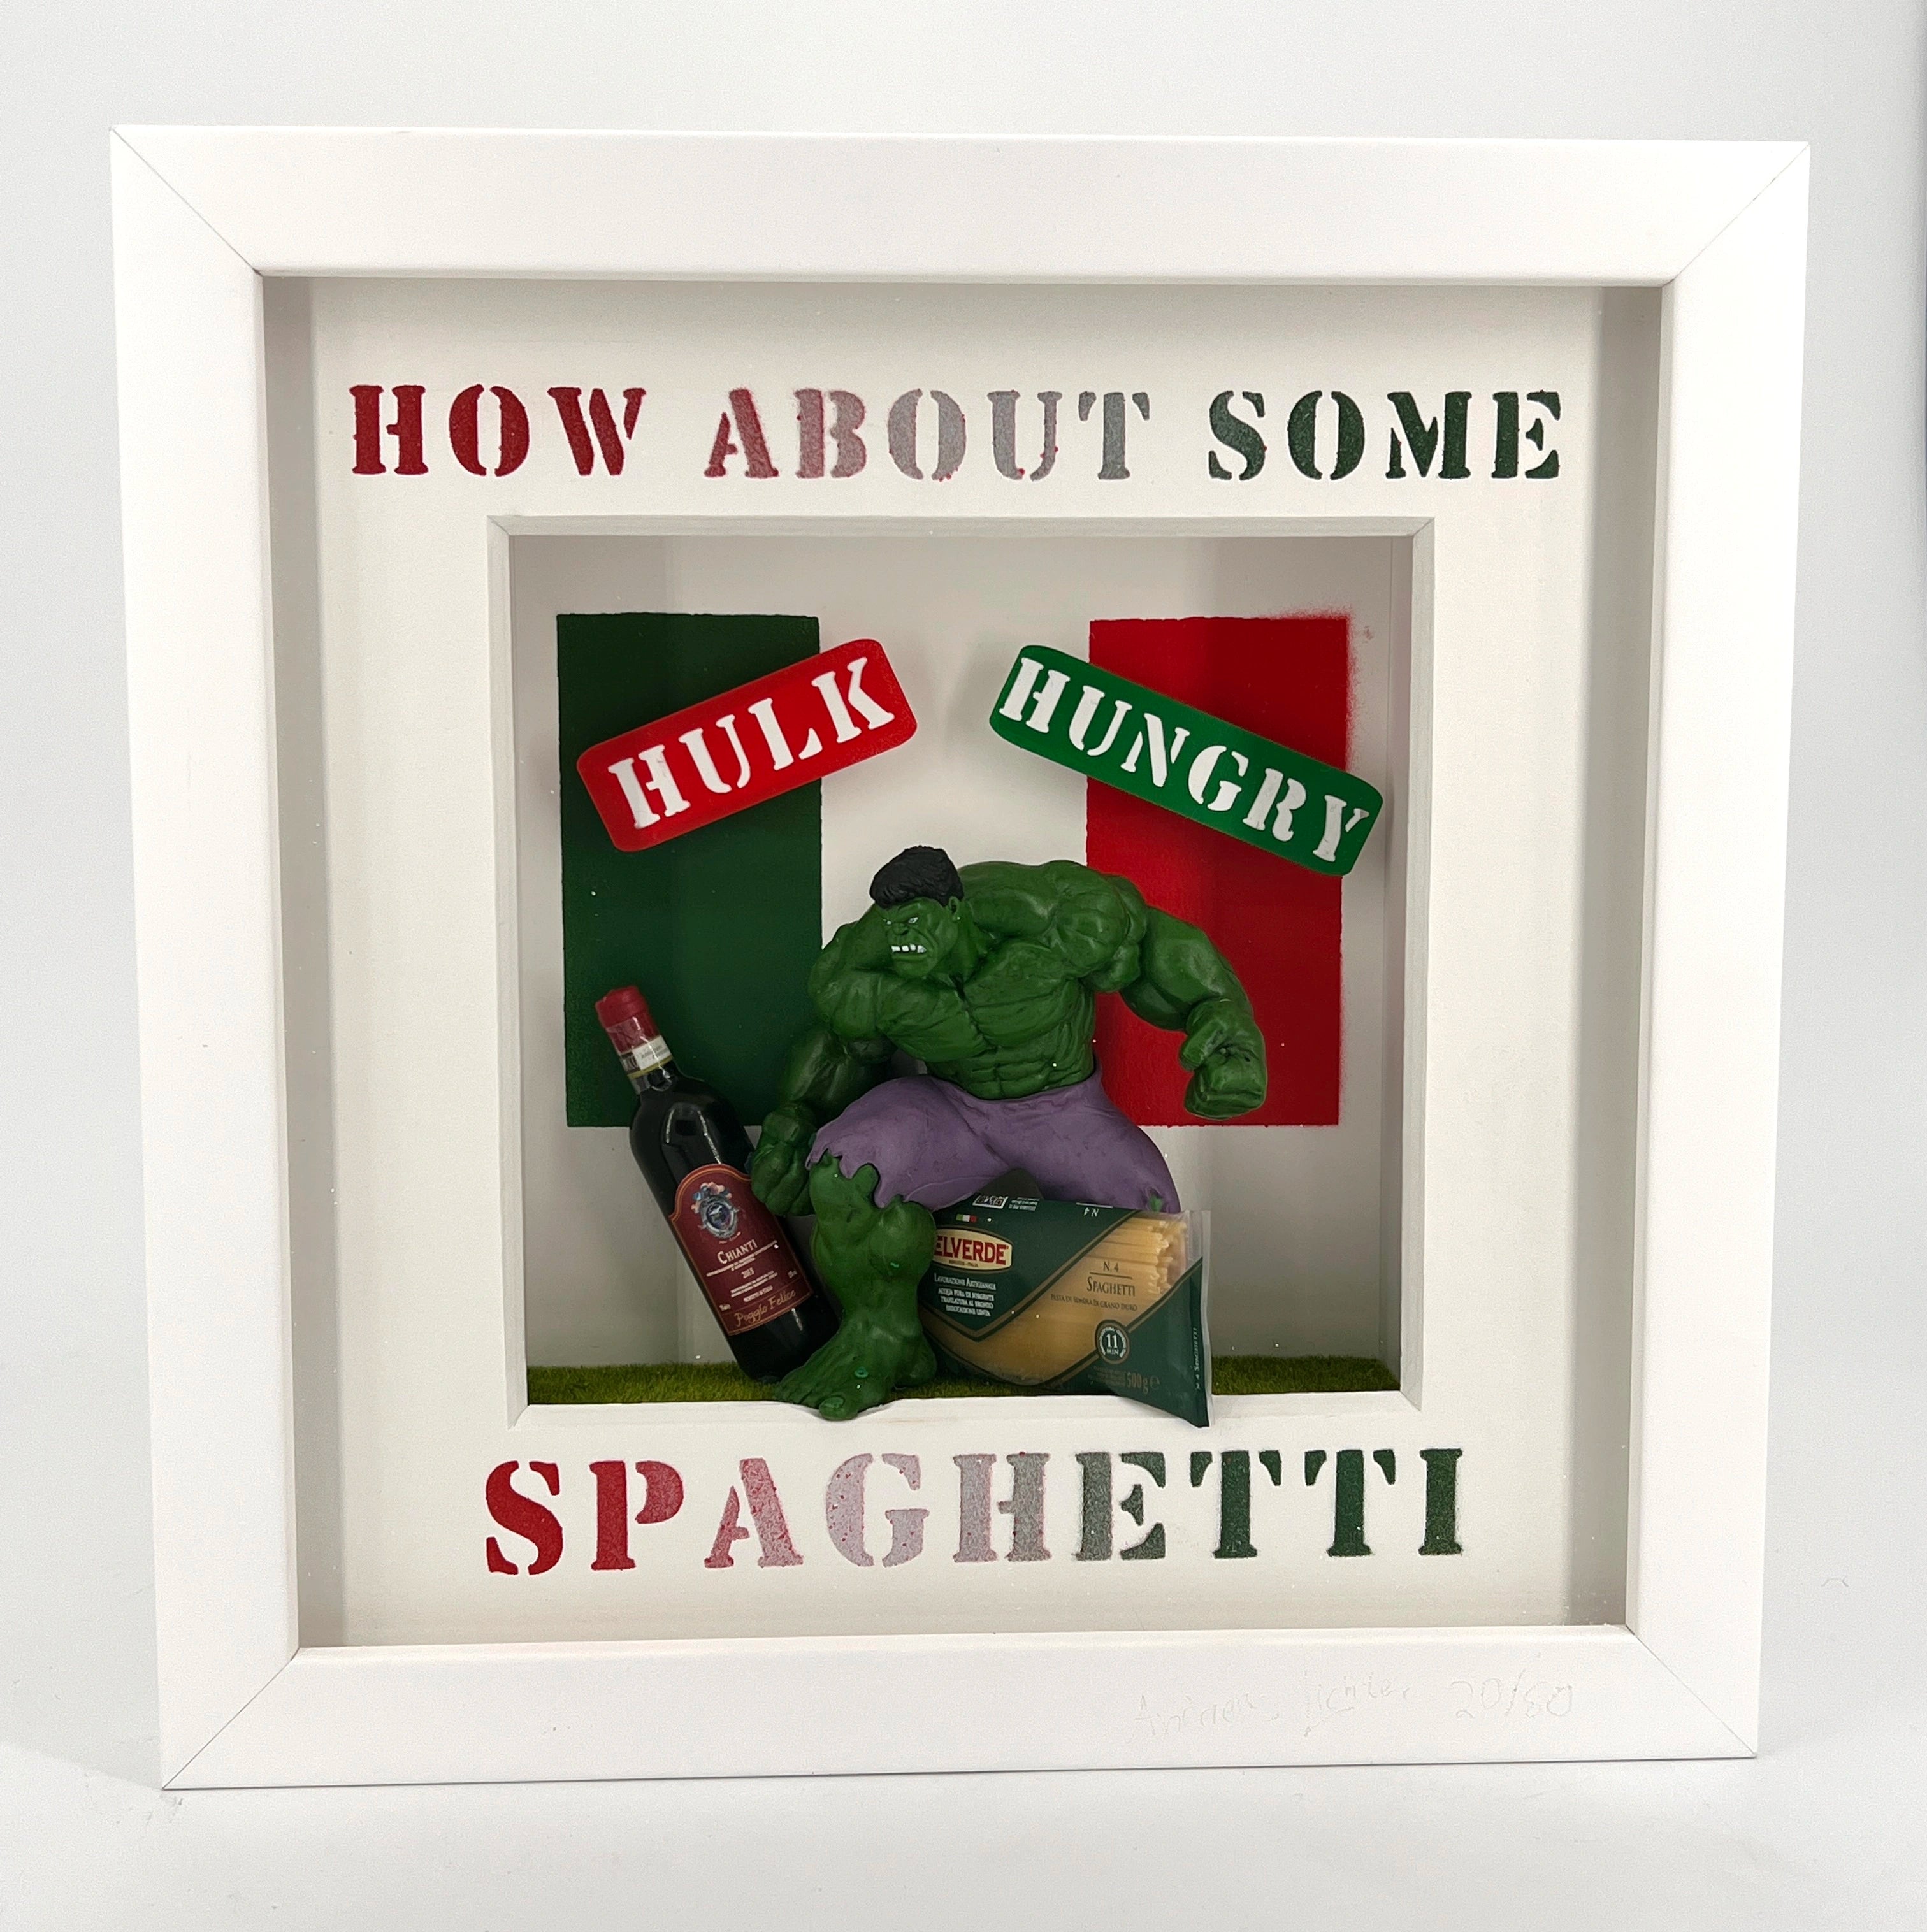 Andreas Lichter - How about some Spaghetti - Hulk - Galerie Vogel